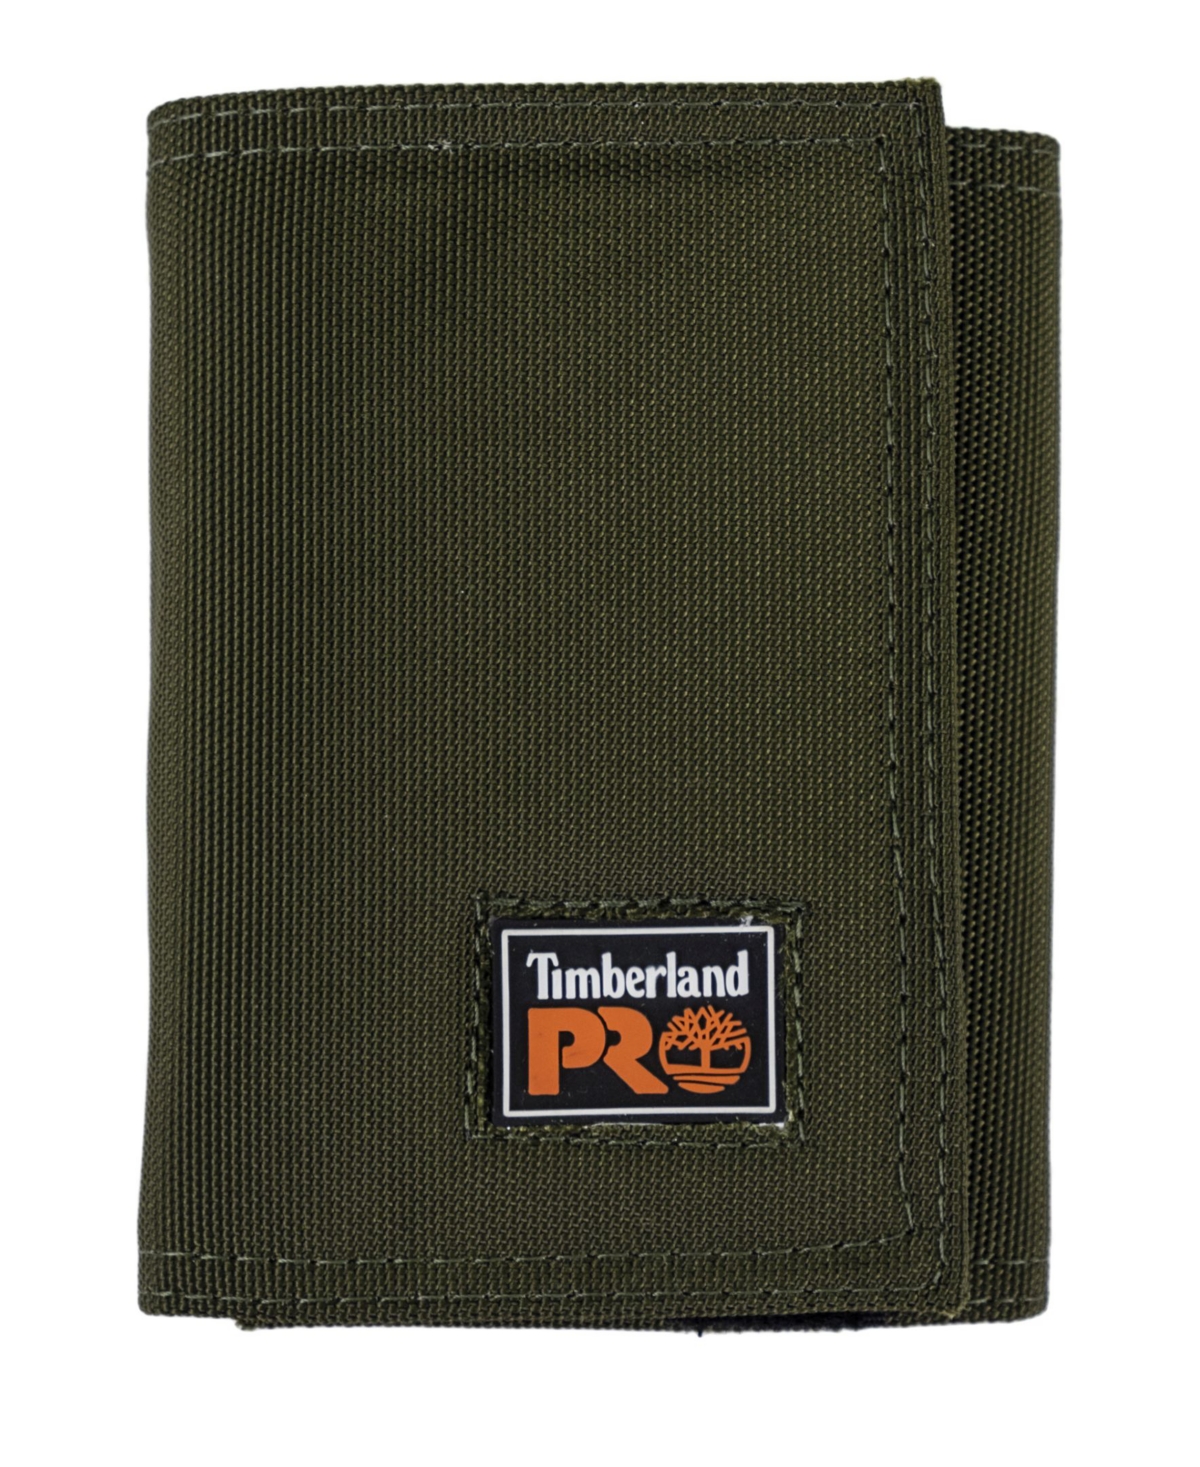 Timberland Pro Men's Heavy Duty Fabric Trifold Wallet In Olive